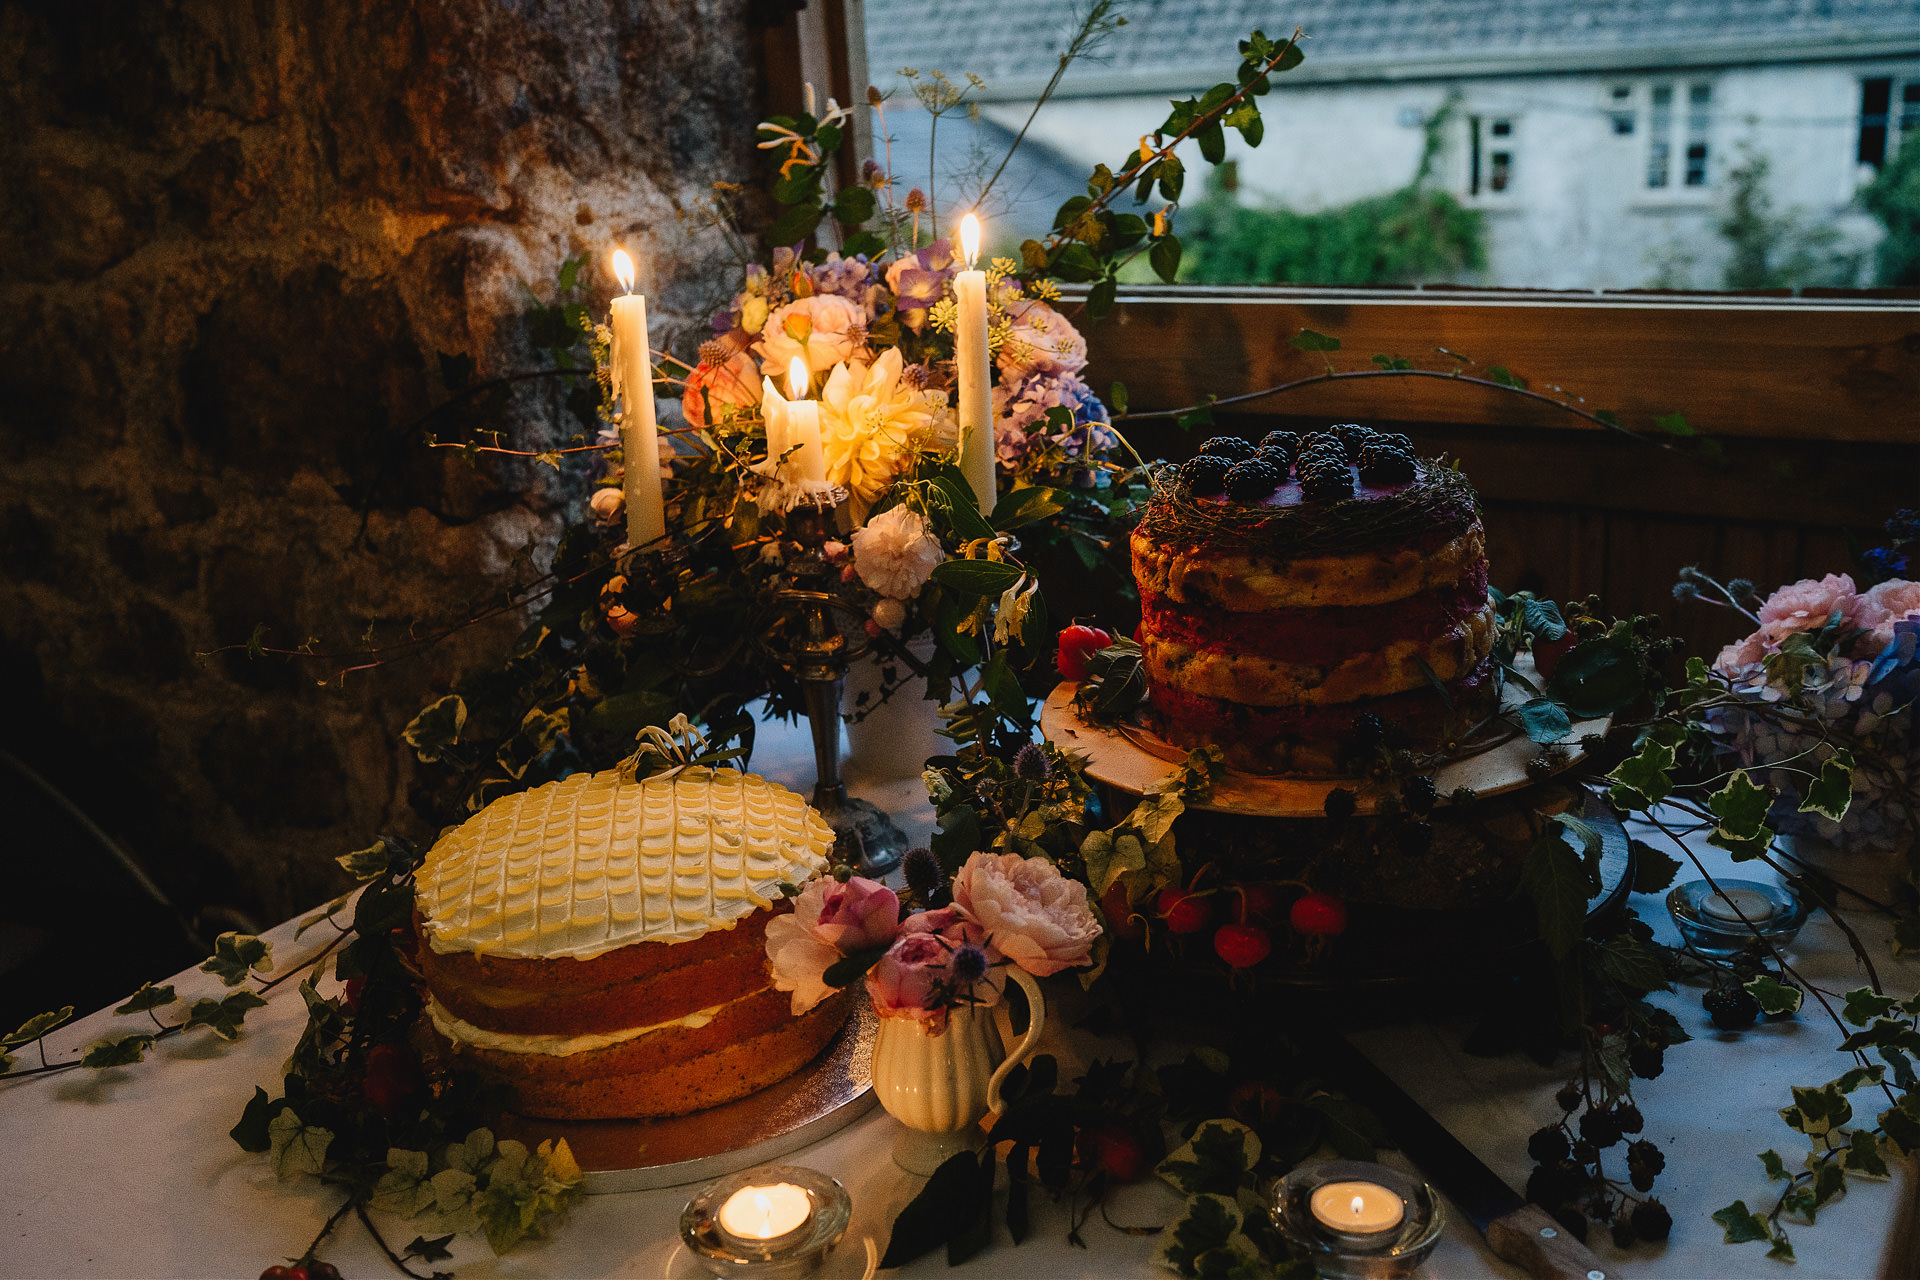 Cakes with candles lit and beautiful foliage decorations in a wedding barn